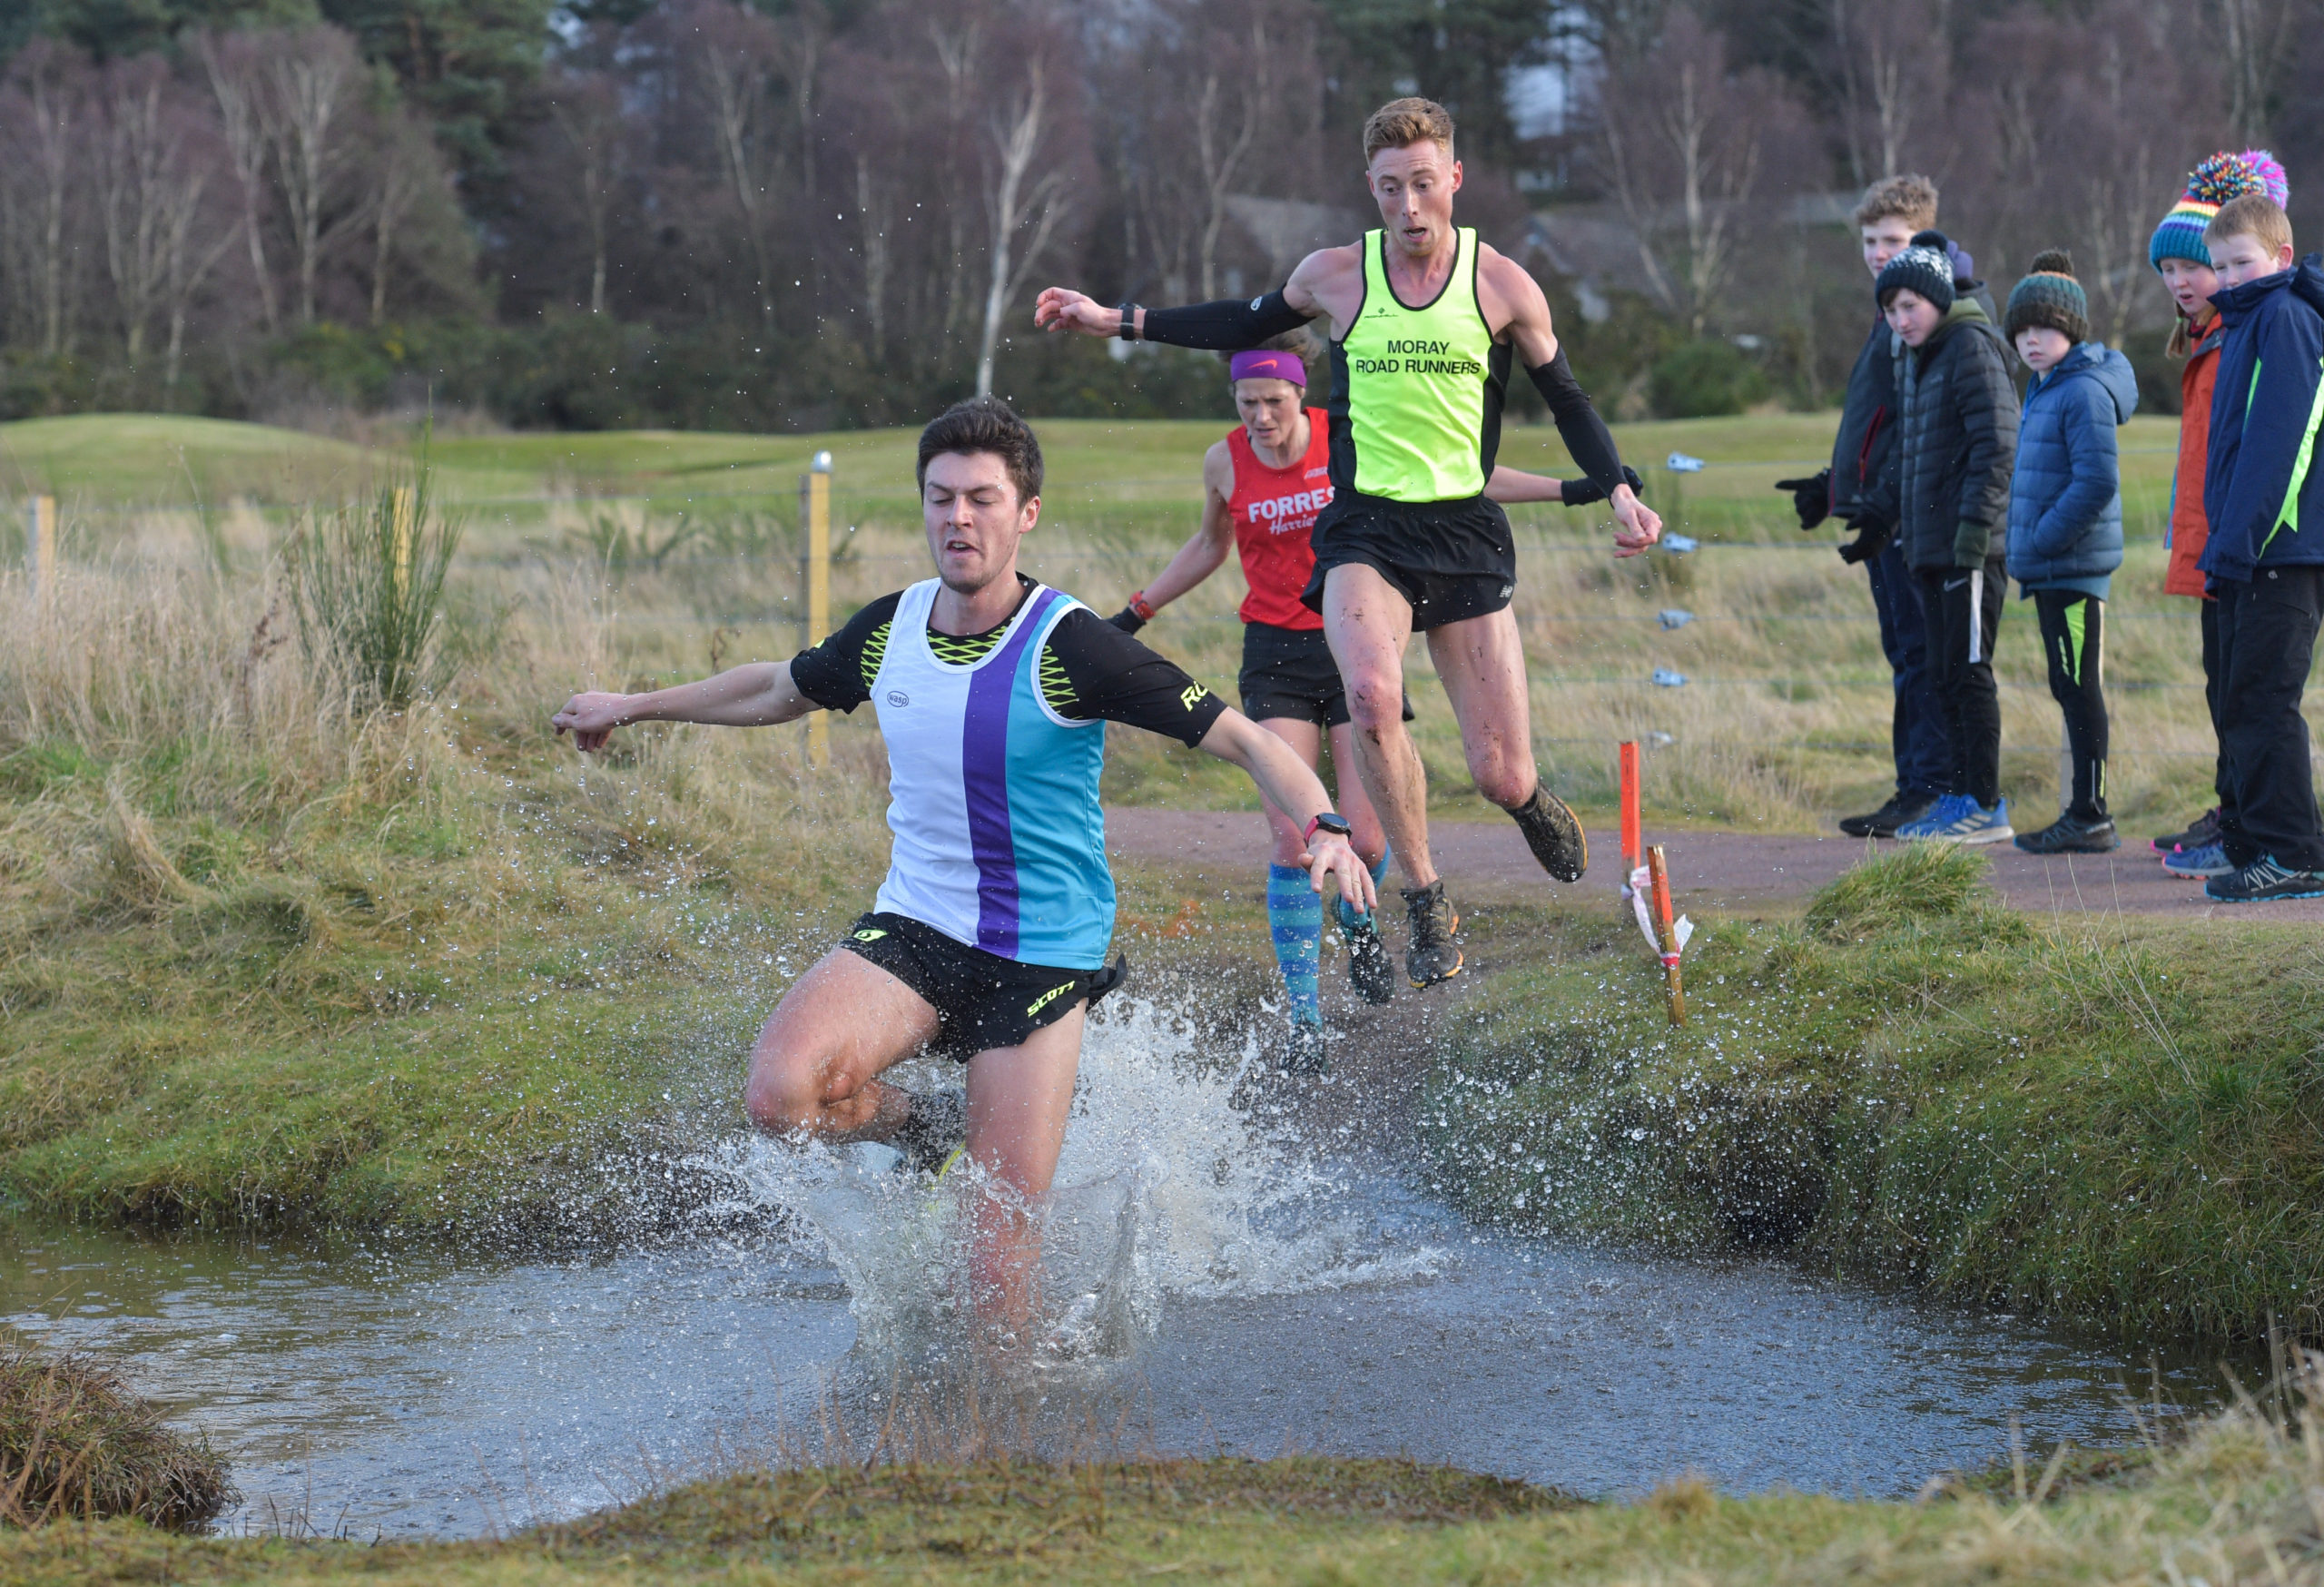 Ross Gollan being chased by Kenny Wilson through the water obstacle.
Pictures by Jason Hedges.